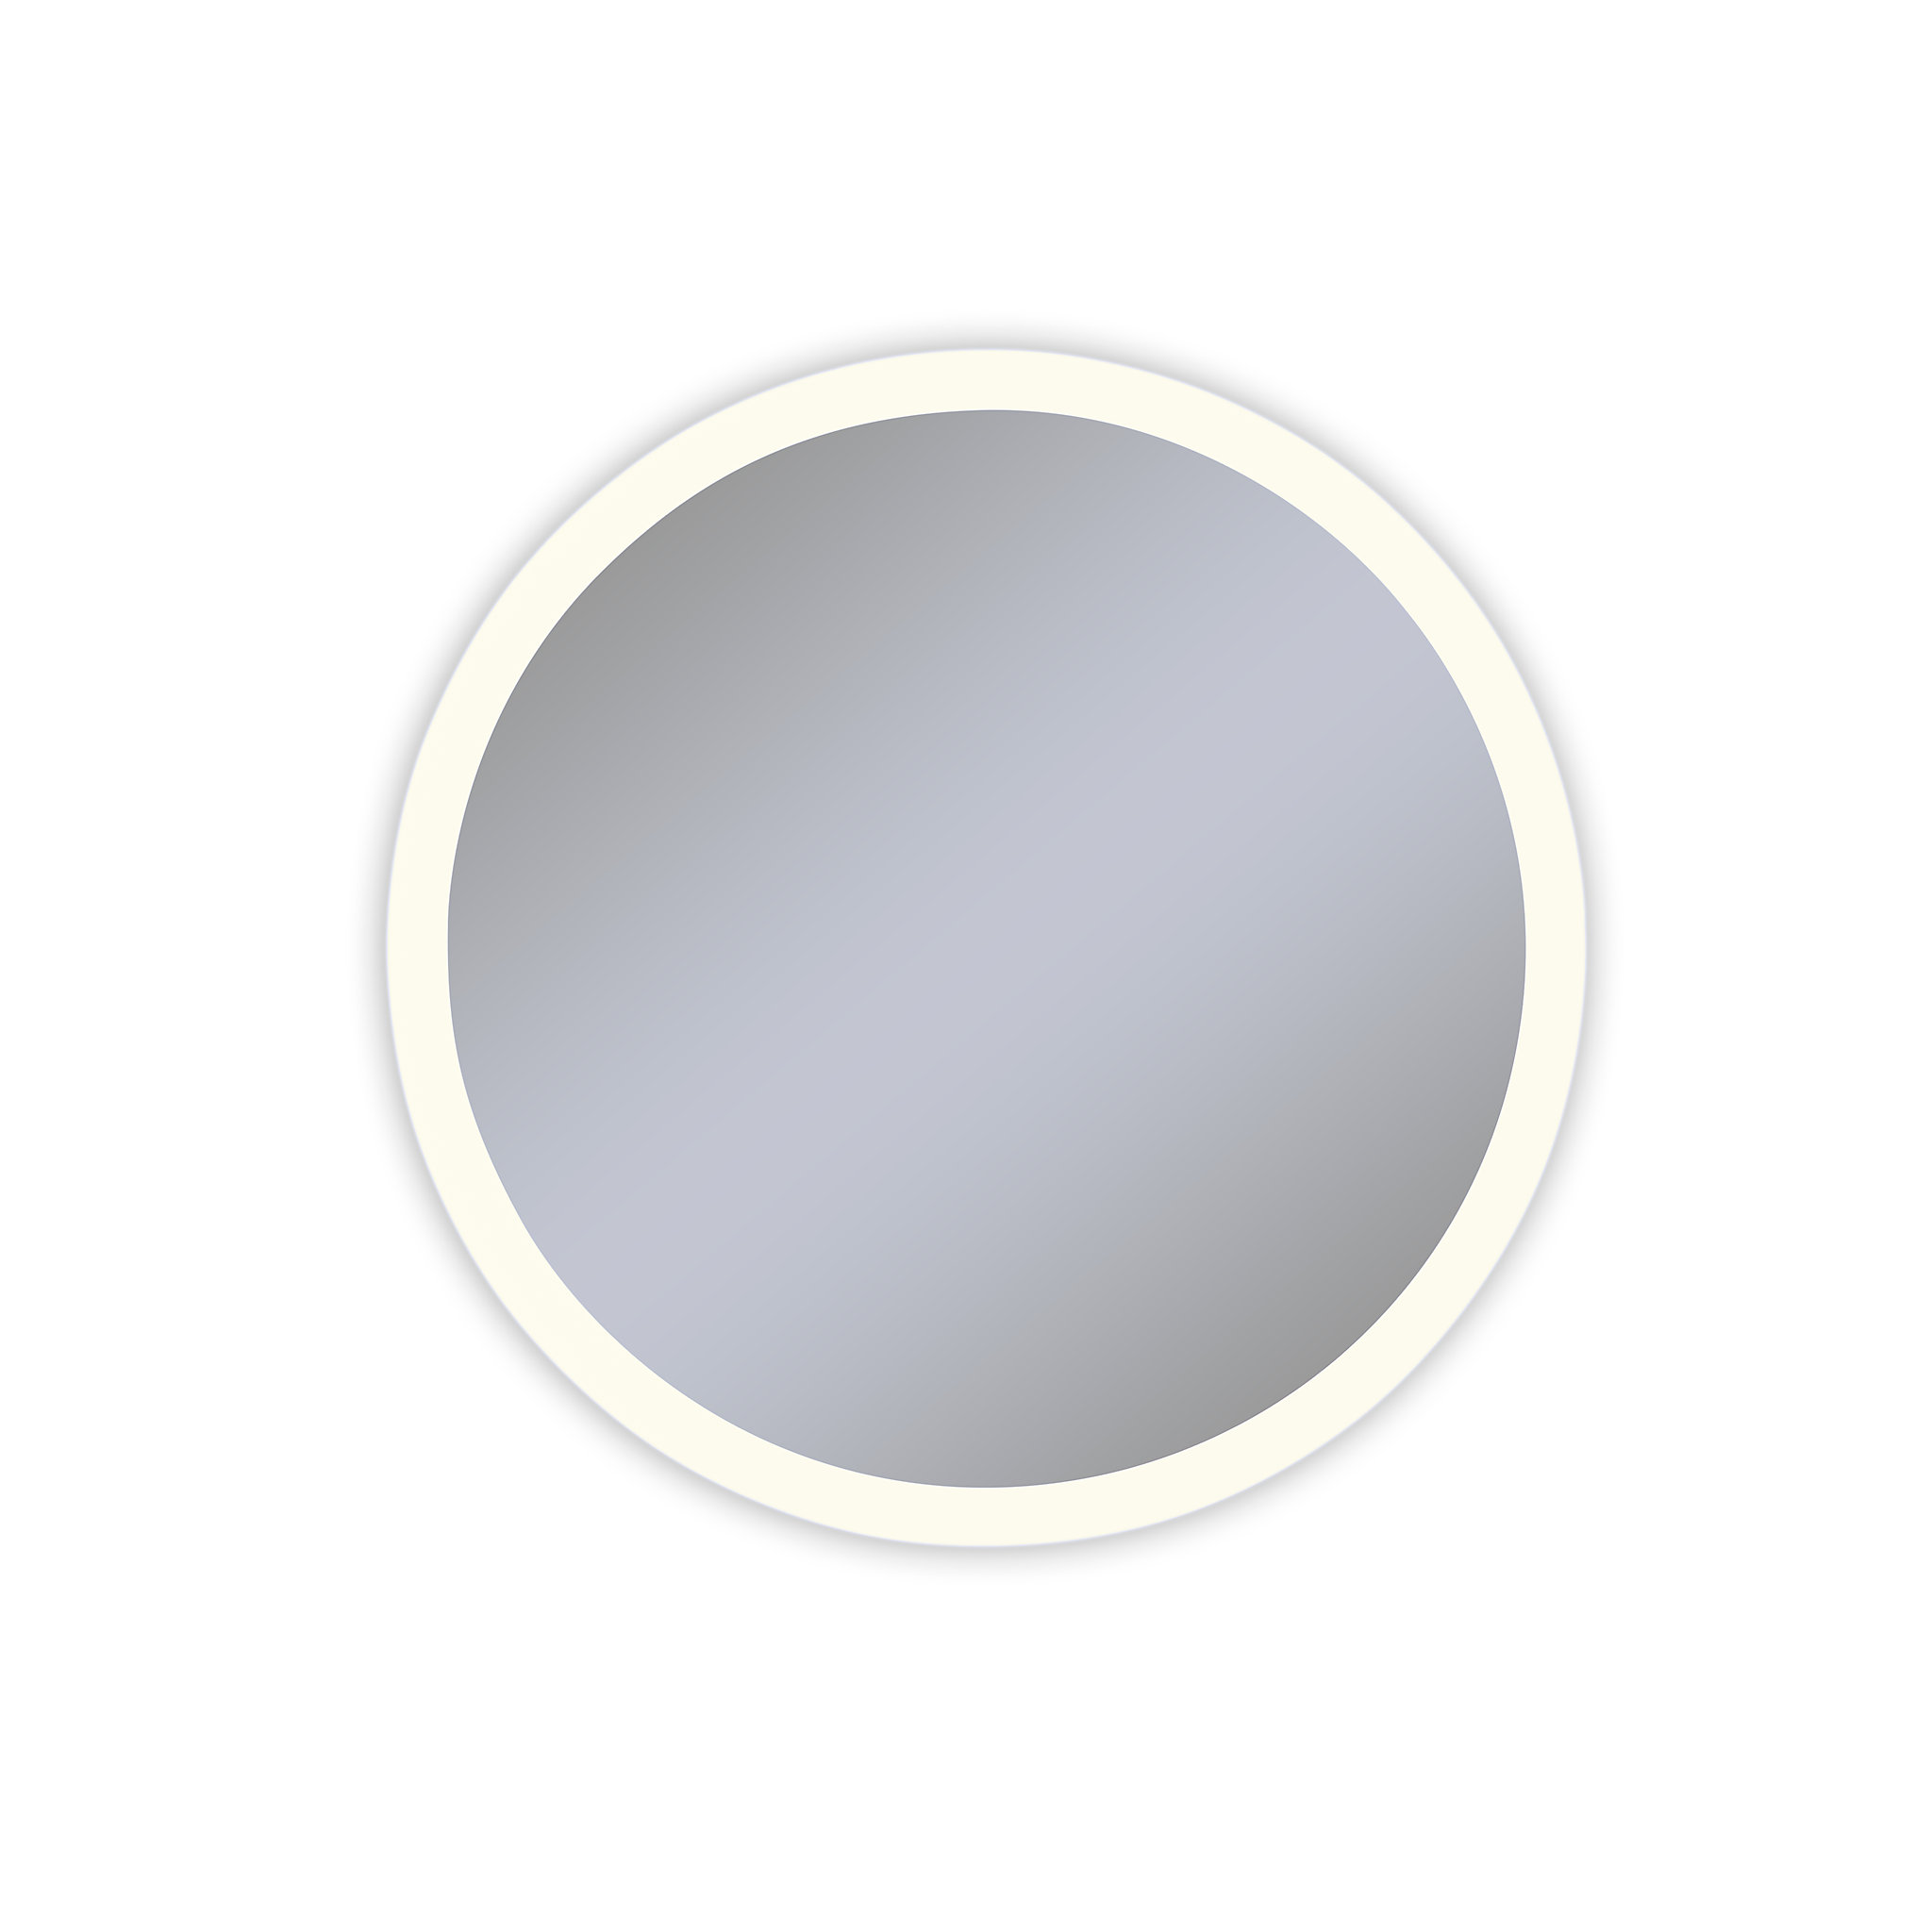 Robern YM0030CPFPD3Vitality Lighted Mirror, 30" Circle, Perimeter Light Pattern, 2700K Temperature (Warm Light), Dimmable, Defog